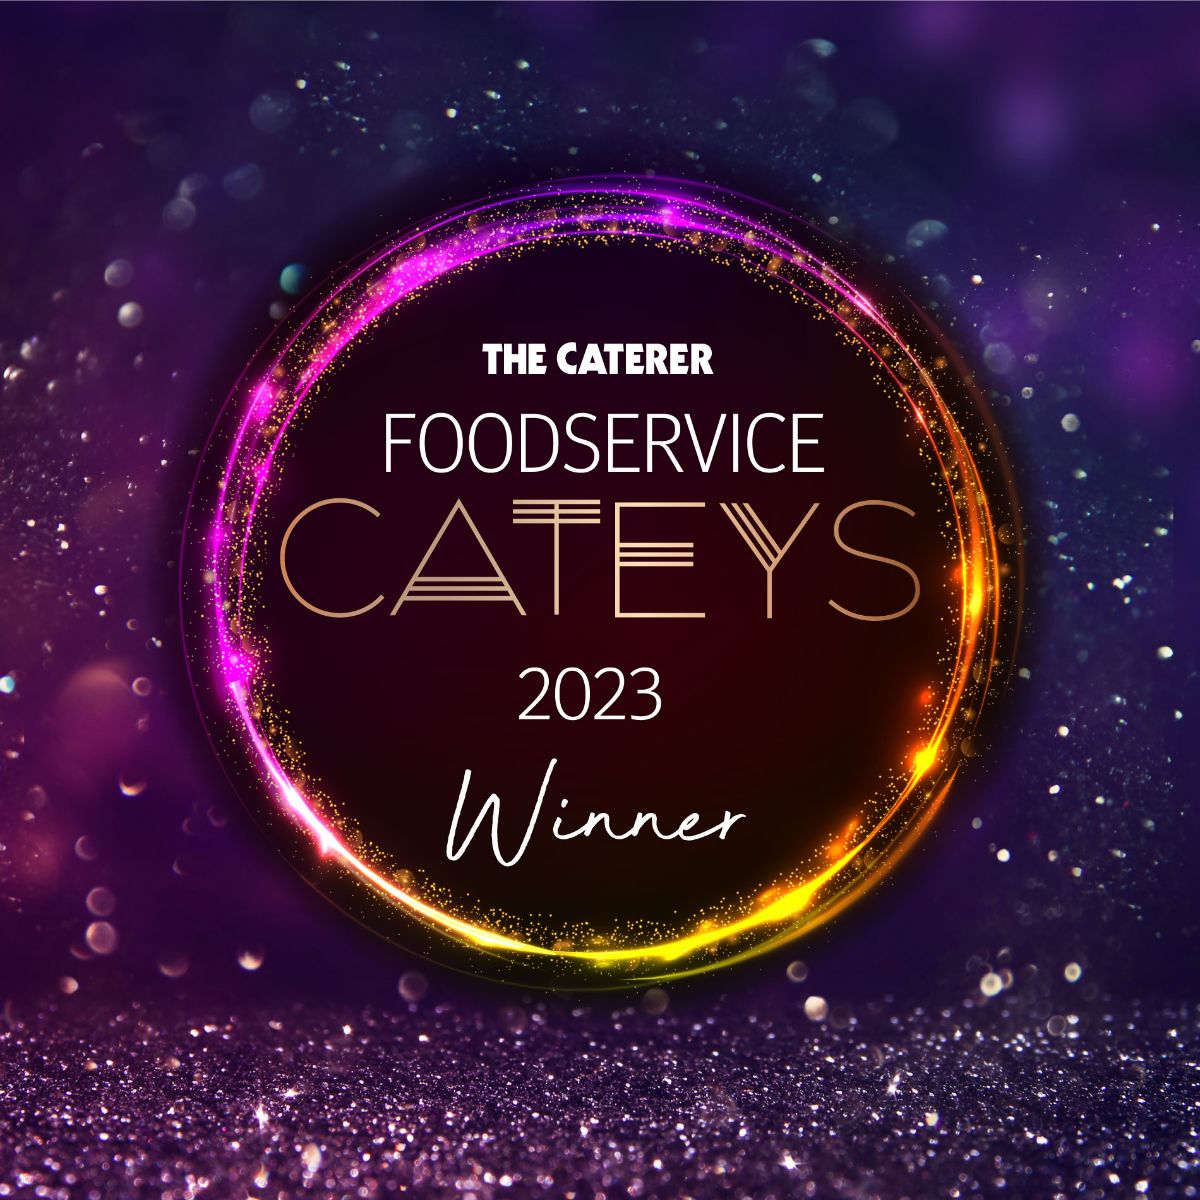 Winner of Boutique Caterer of the Year and Event Caterer of the Year at the 2023 Foodservice Cateys.